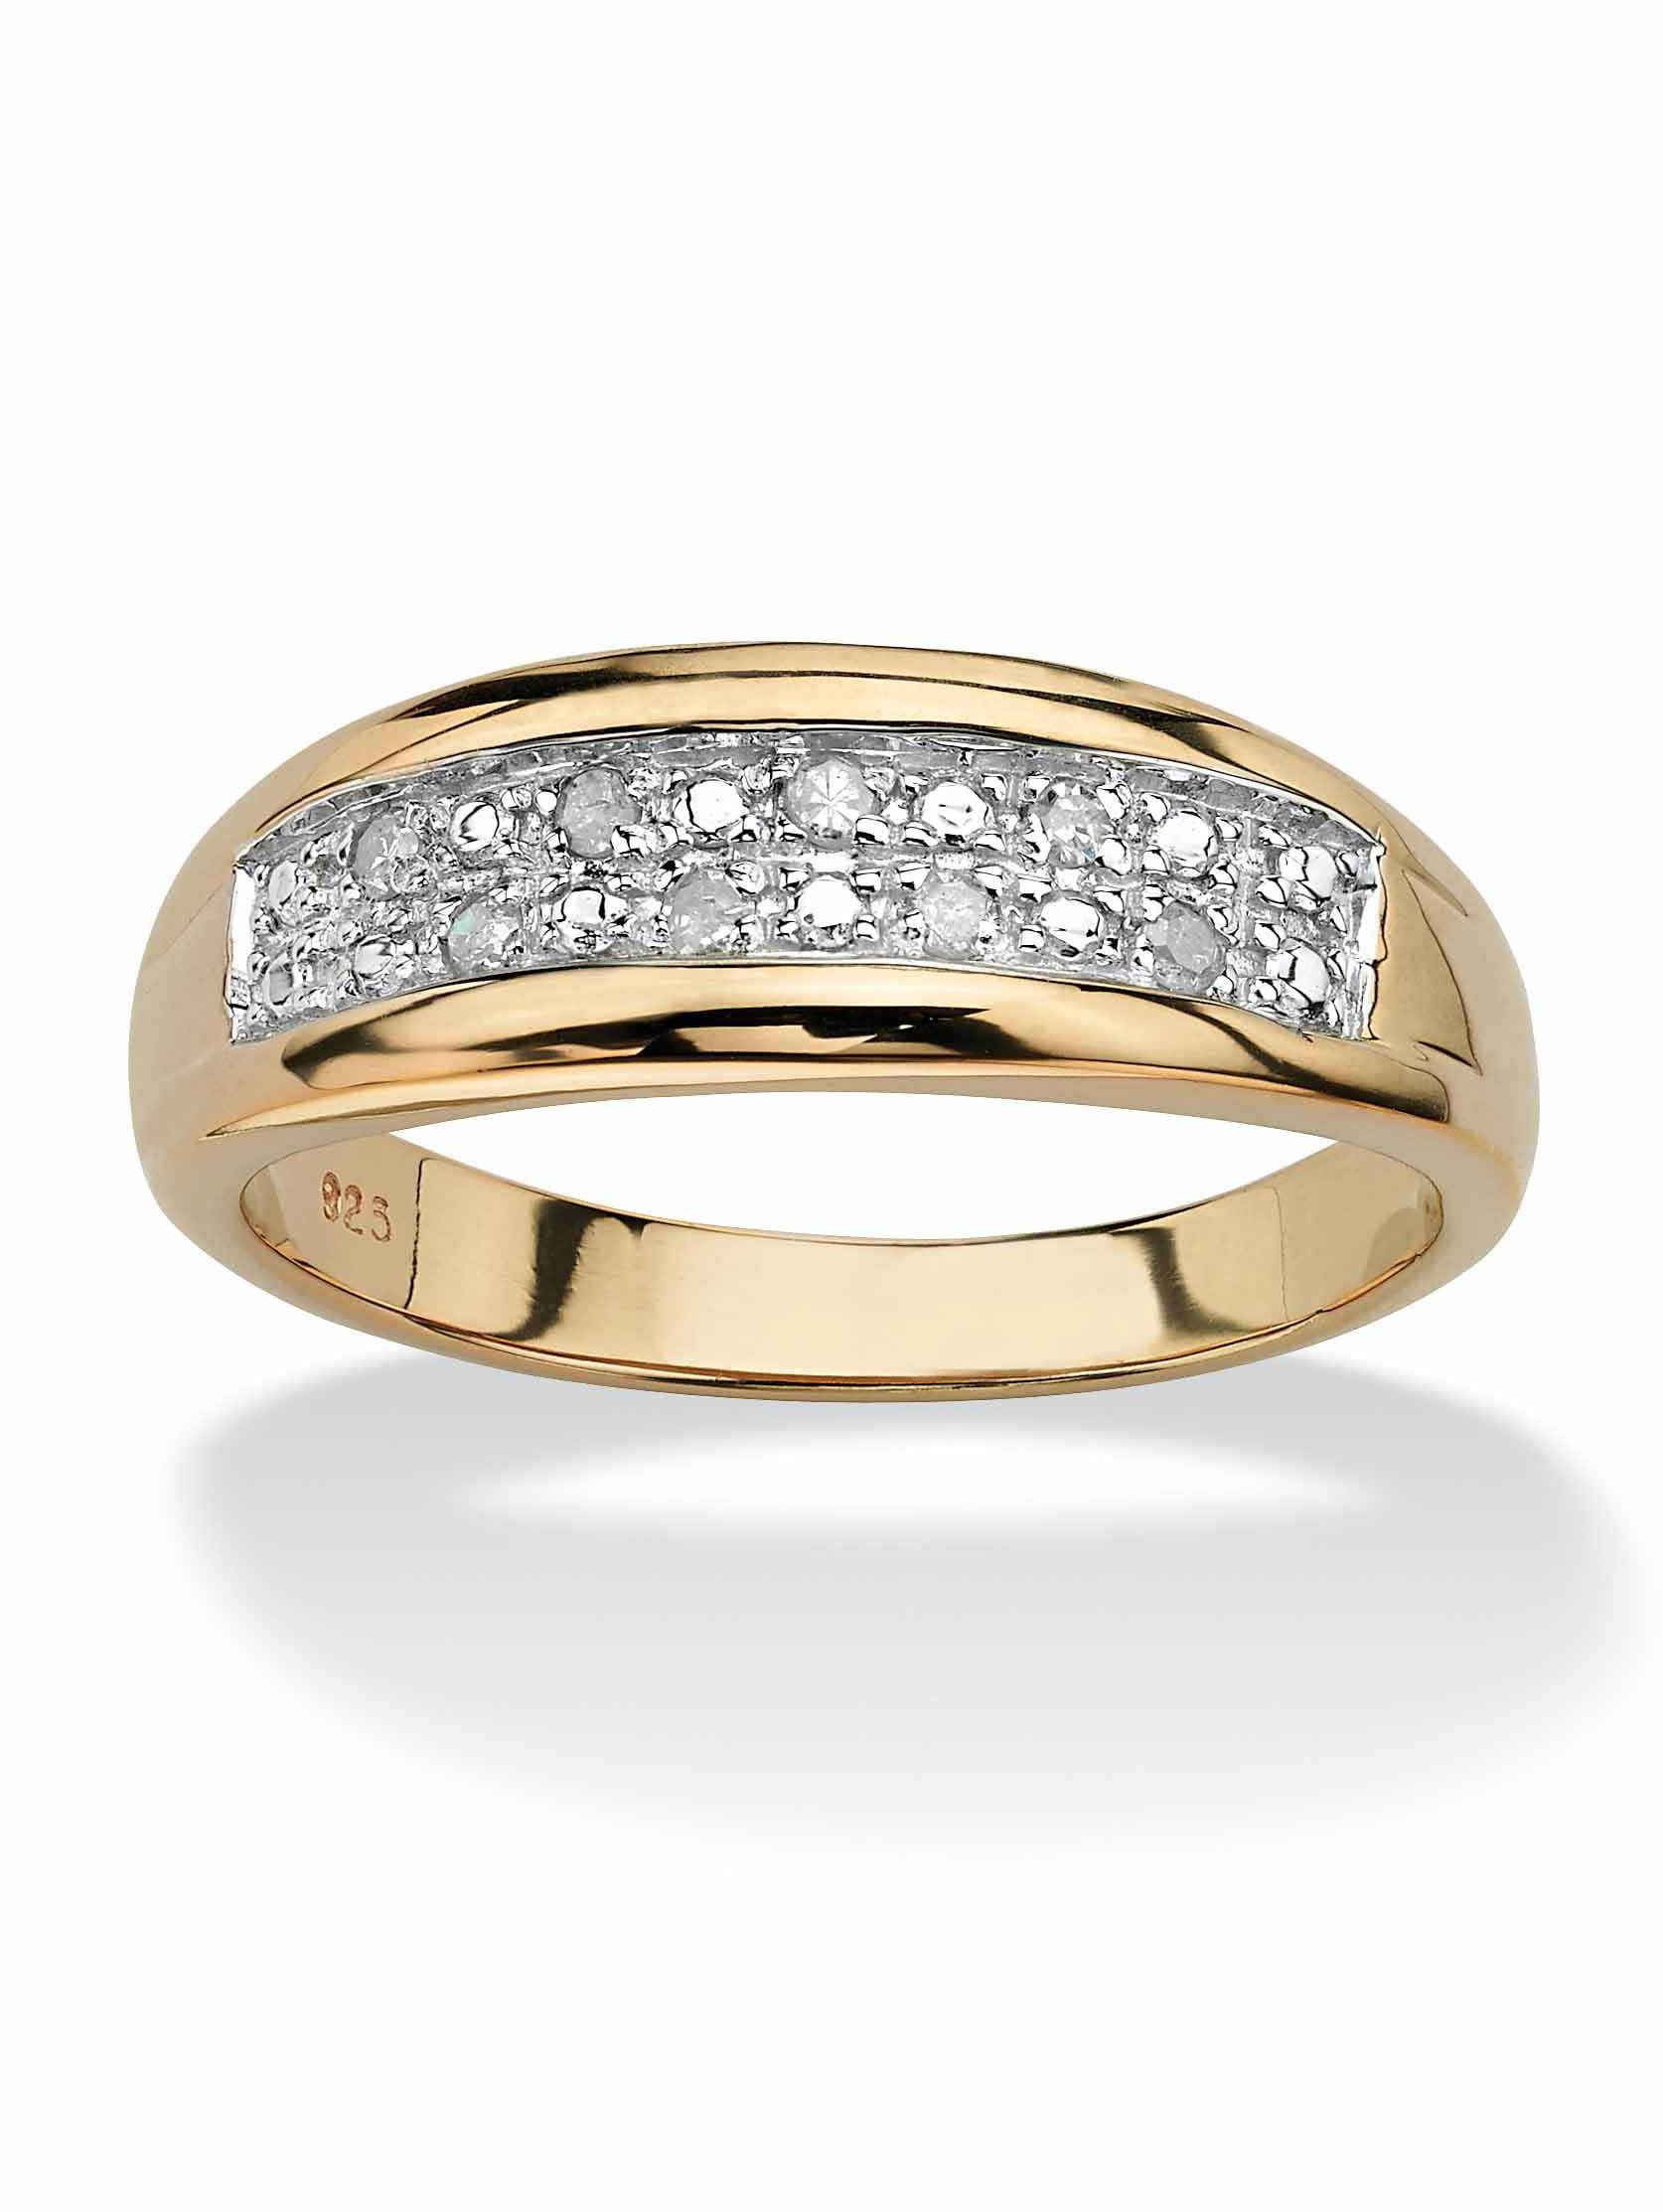 Buy Mine Platinum PT 950 Two Tone Purity Band Ring for Men Online